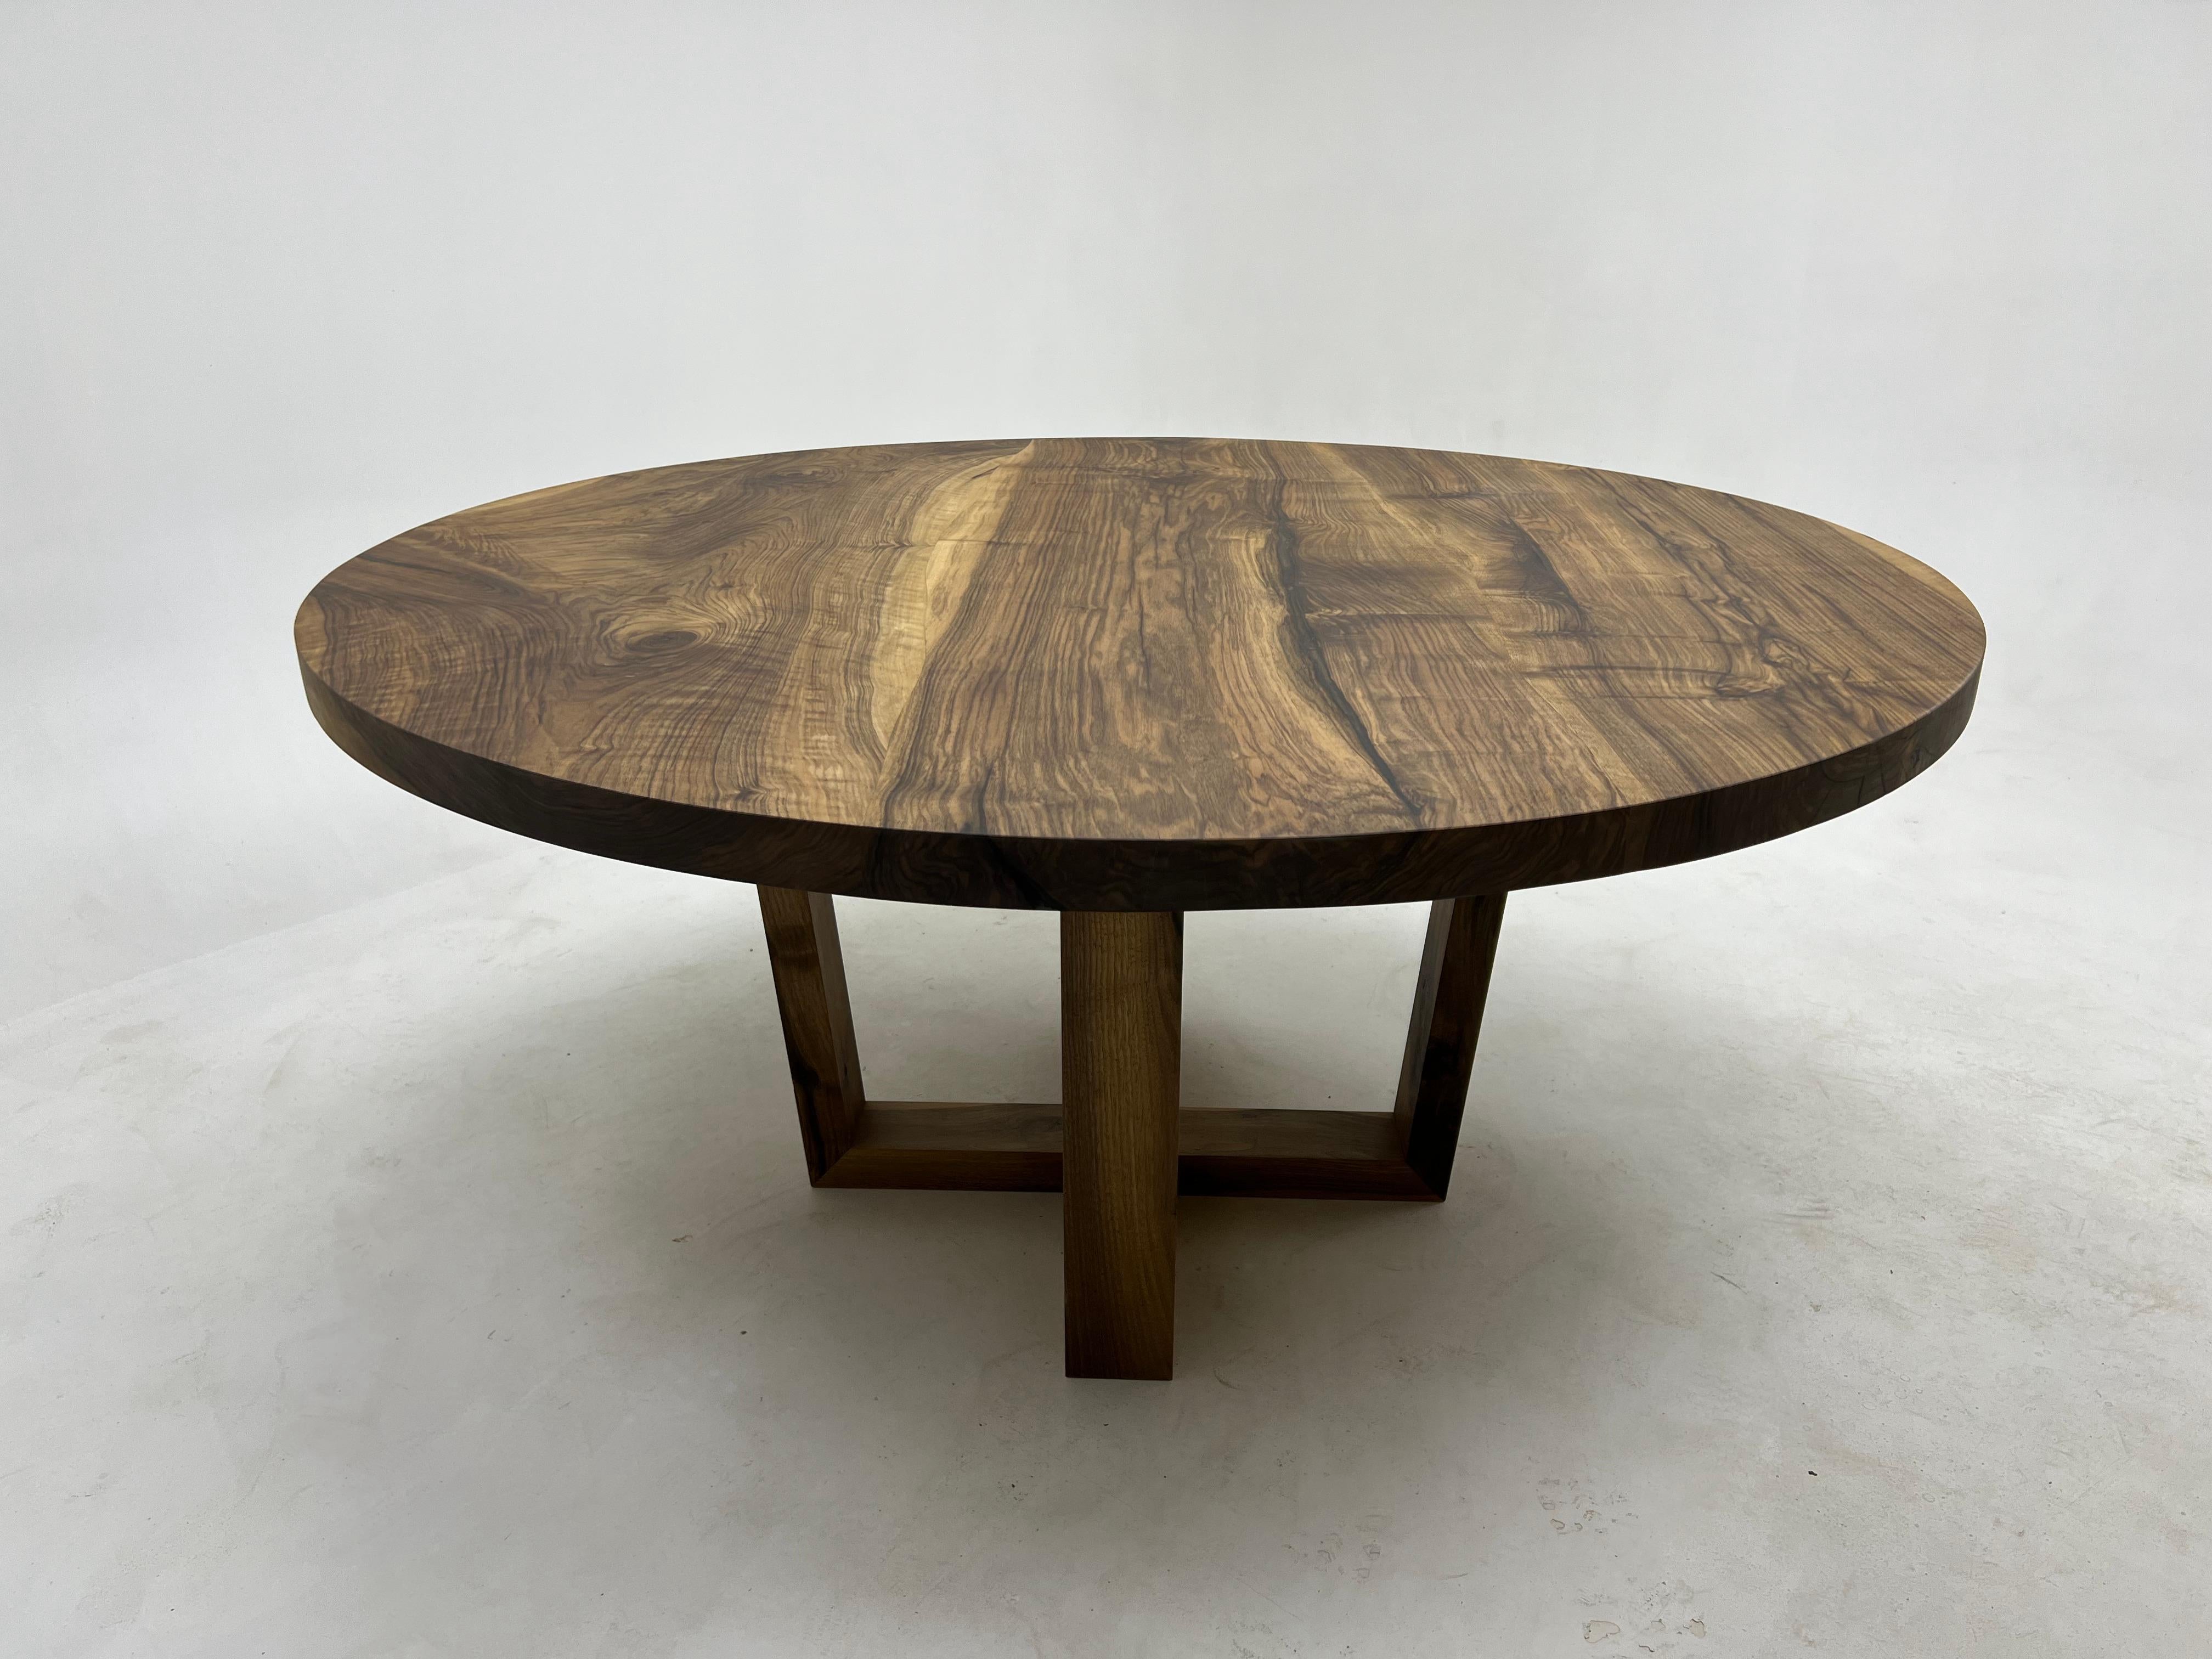 This wooden round table is made from high-quality Turkish walnut wood, known for its warm color and beautiful textures.

 You can use it as a dining table, a focal point in your living area, or a  conference room table.

The smooth, polished surface